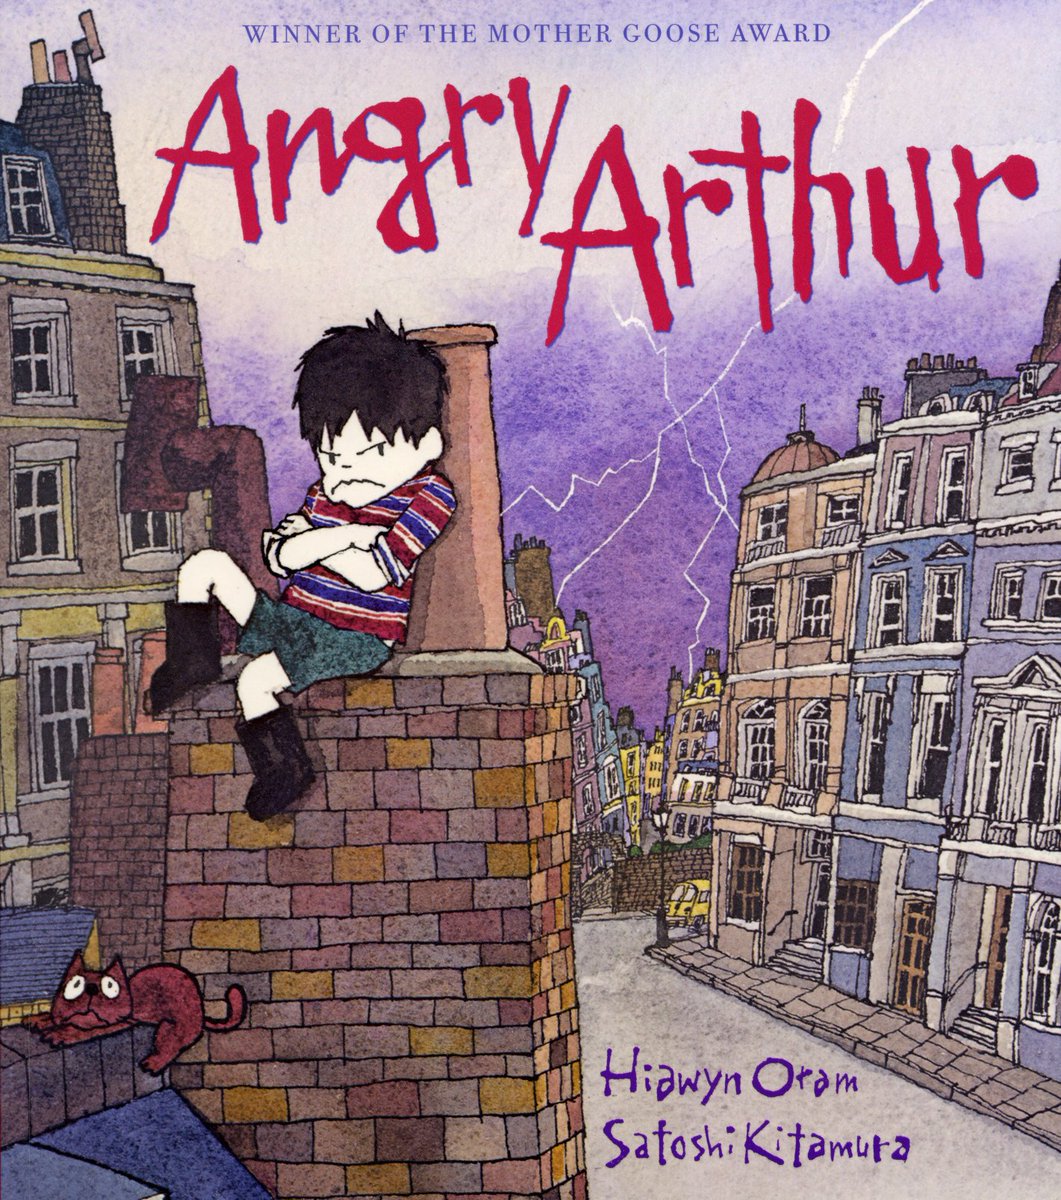 Angry Arthur by Satoshi Kitamura and Hiawyn Oram was our  #PicturebookADay for today.Once there was a boy called Arthur, who wanted to stay up and watch TV, but his mother wouldn’t let him. “I’ll get angry,” said Arthur, and he did. Very, very angry...